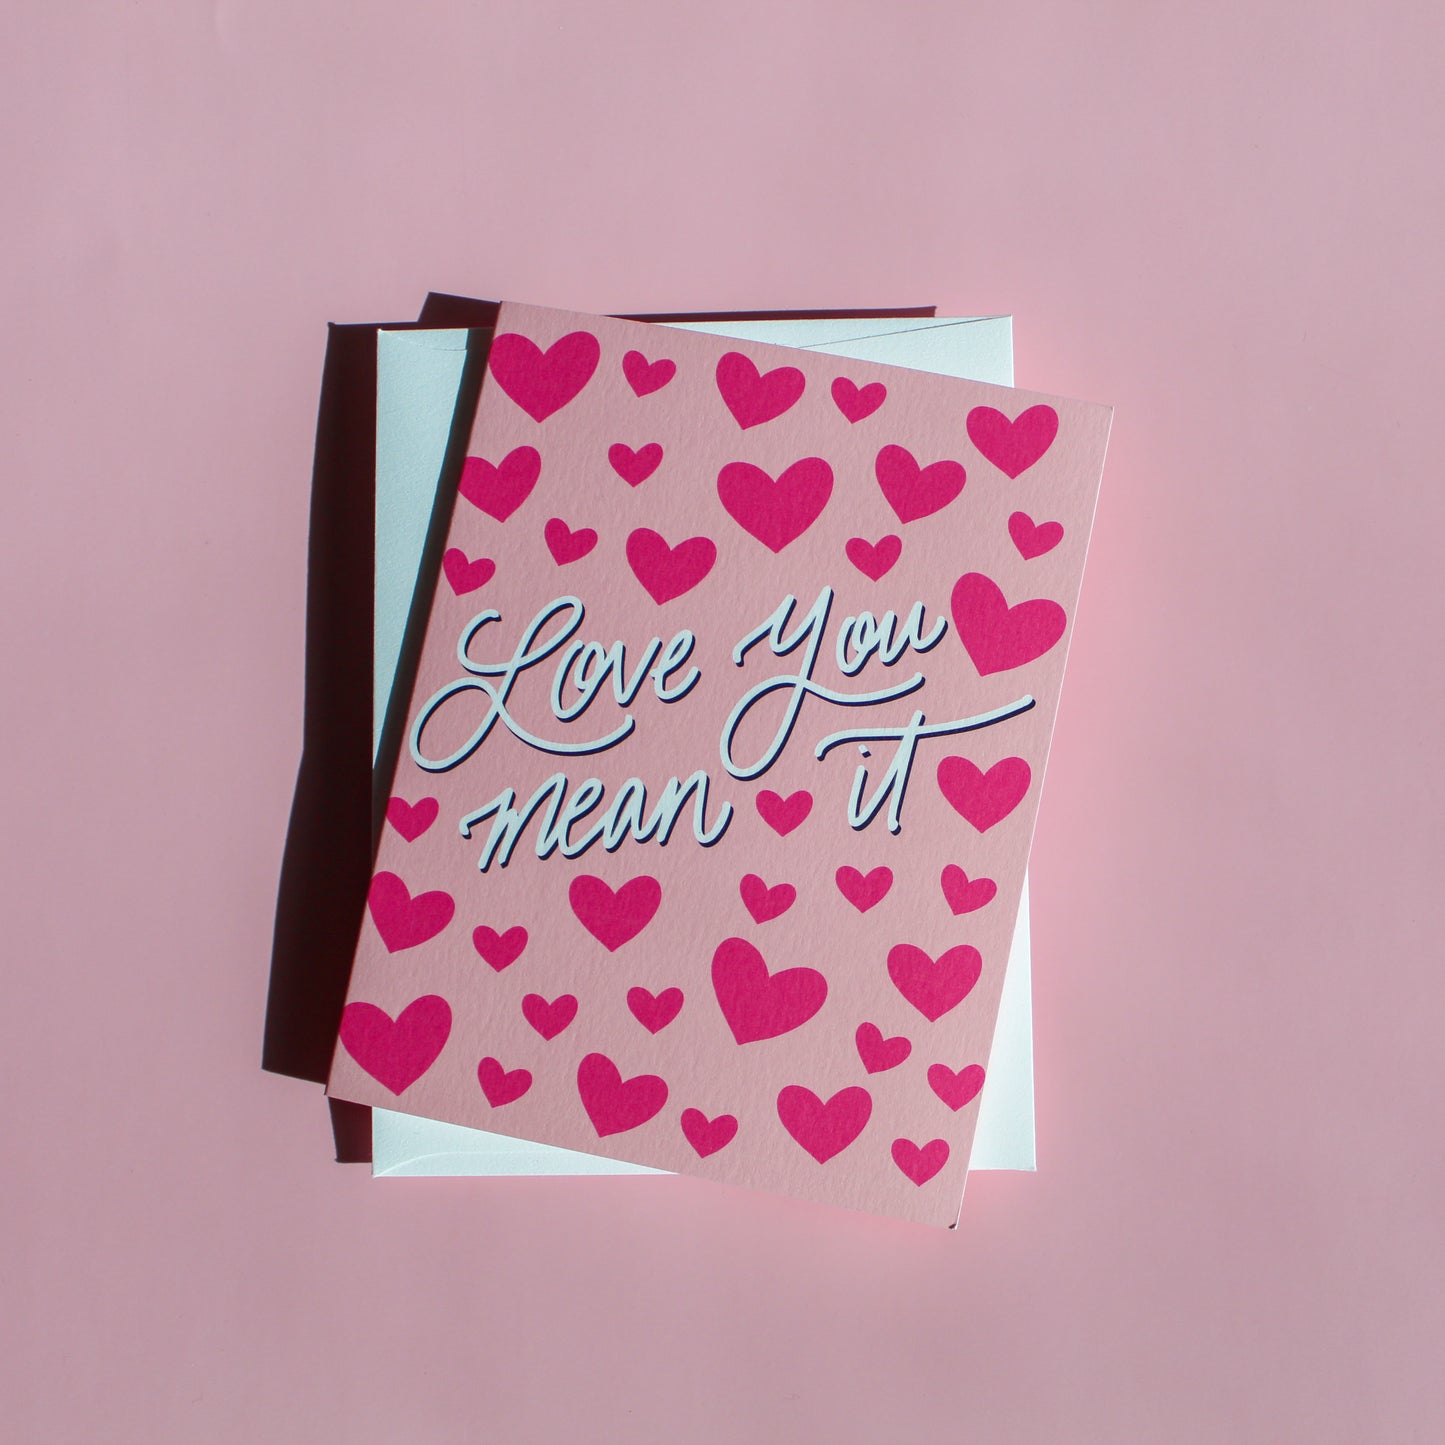 Our "Love You Mean It!" Valentine's Day card features hand drawn hearts on a pink background - it is perfect for a kid or adult! Each card is folded to 4.25" tall by 5.5" wide, is blank inside and comes with a matching white envelope. Cards are packaged in cellophane sleeves.